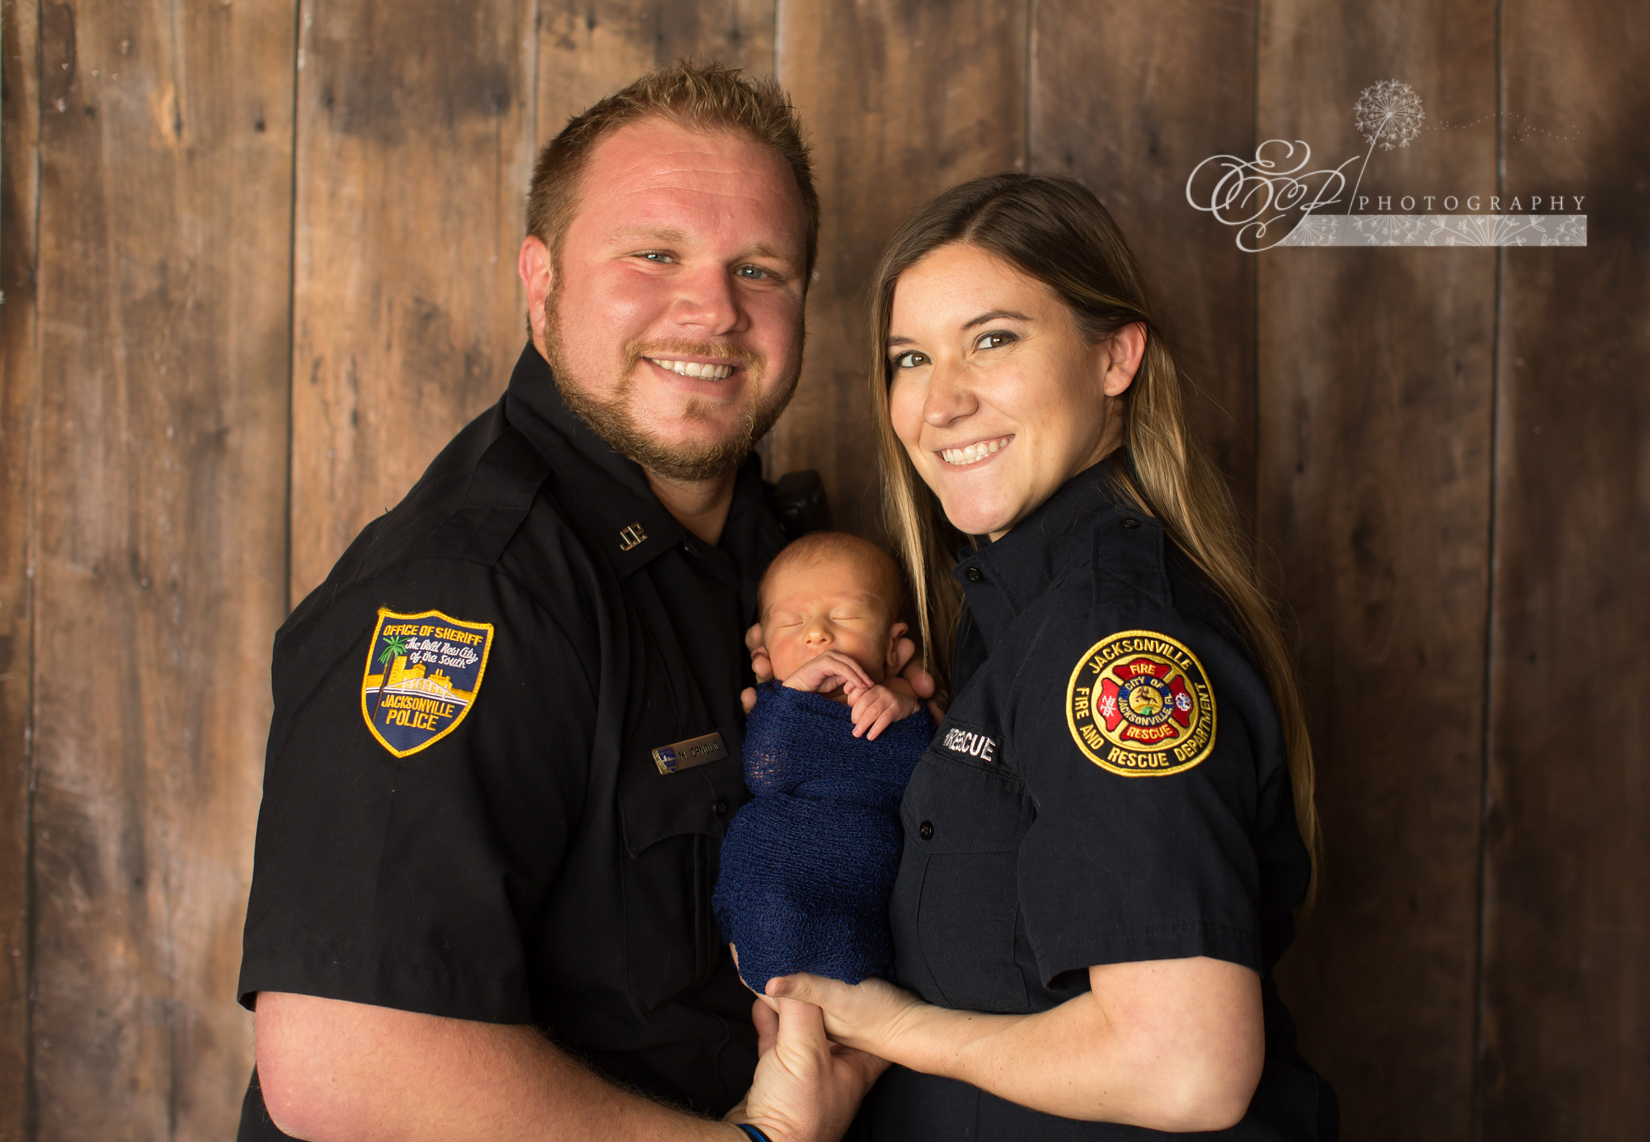 PHOTO: Baby Enzo's mom, Caroline Crnolic, 27, is a firefighter for the Jacksonville Fire and Rescue Department and dad Mirza Crnolic is a police officer with the Jacksonville Sheriff's Office in Jacksonville, Fla. 